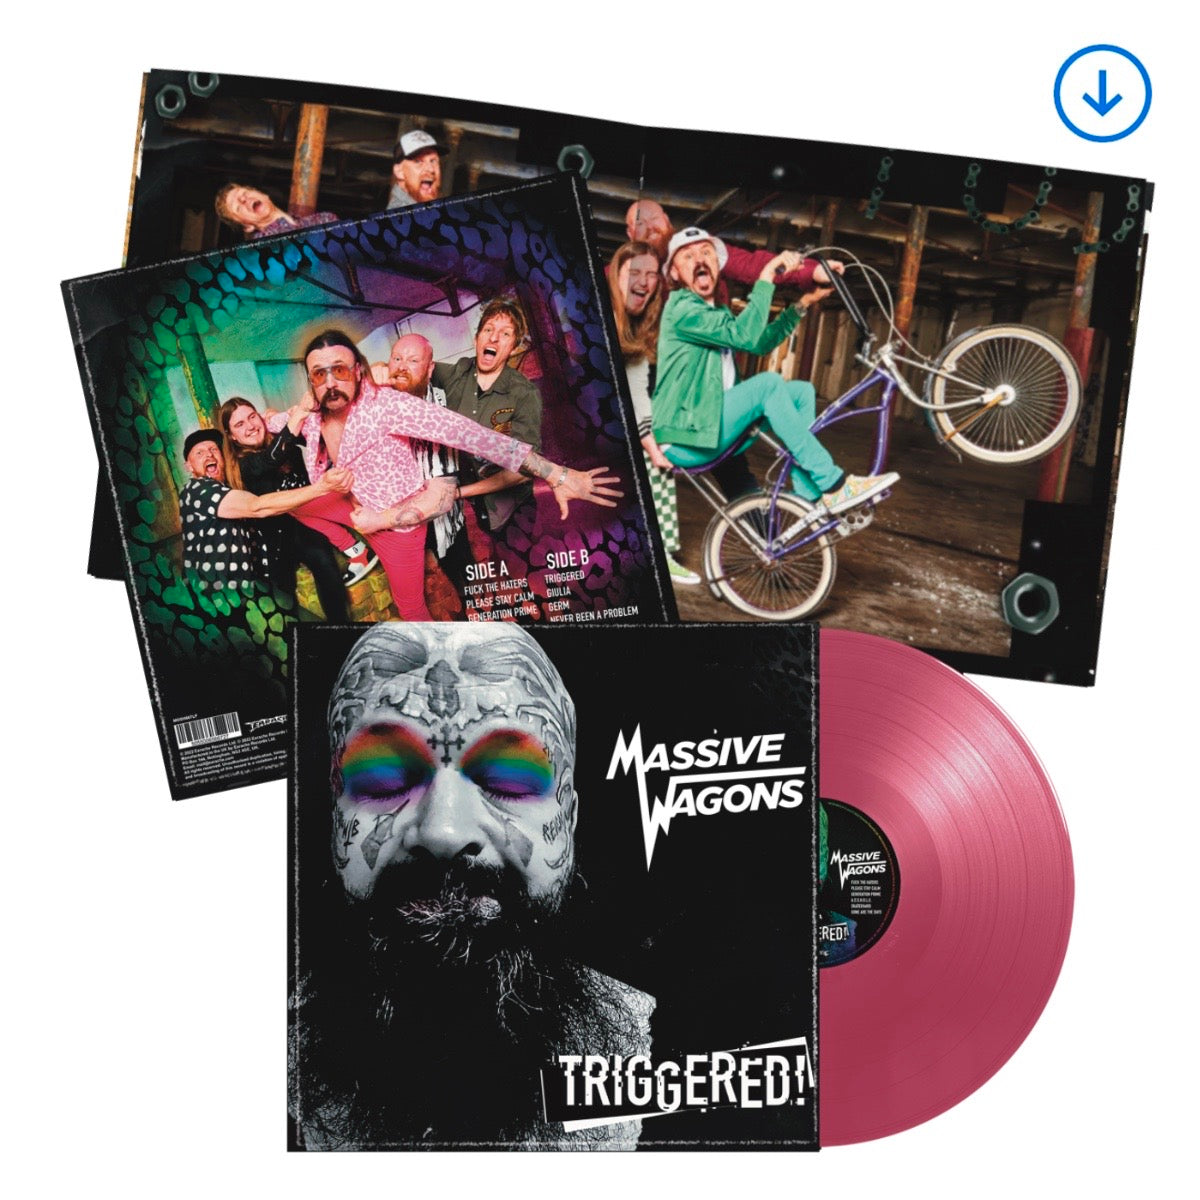 Massive Wagons "TRIGGERED!" Choice of Colour Vinyl w/ 12 Page Booklet